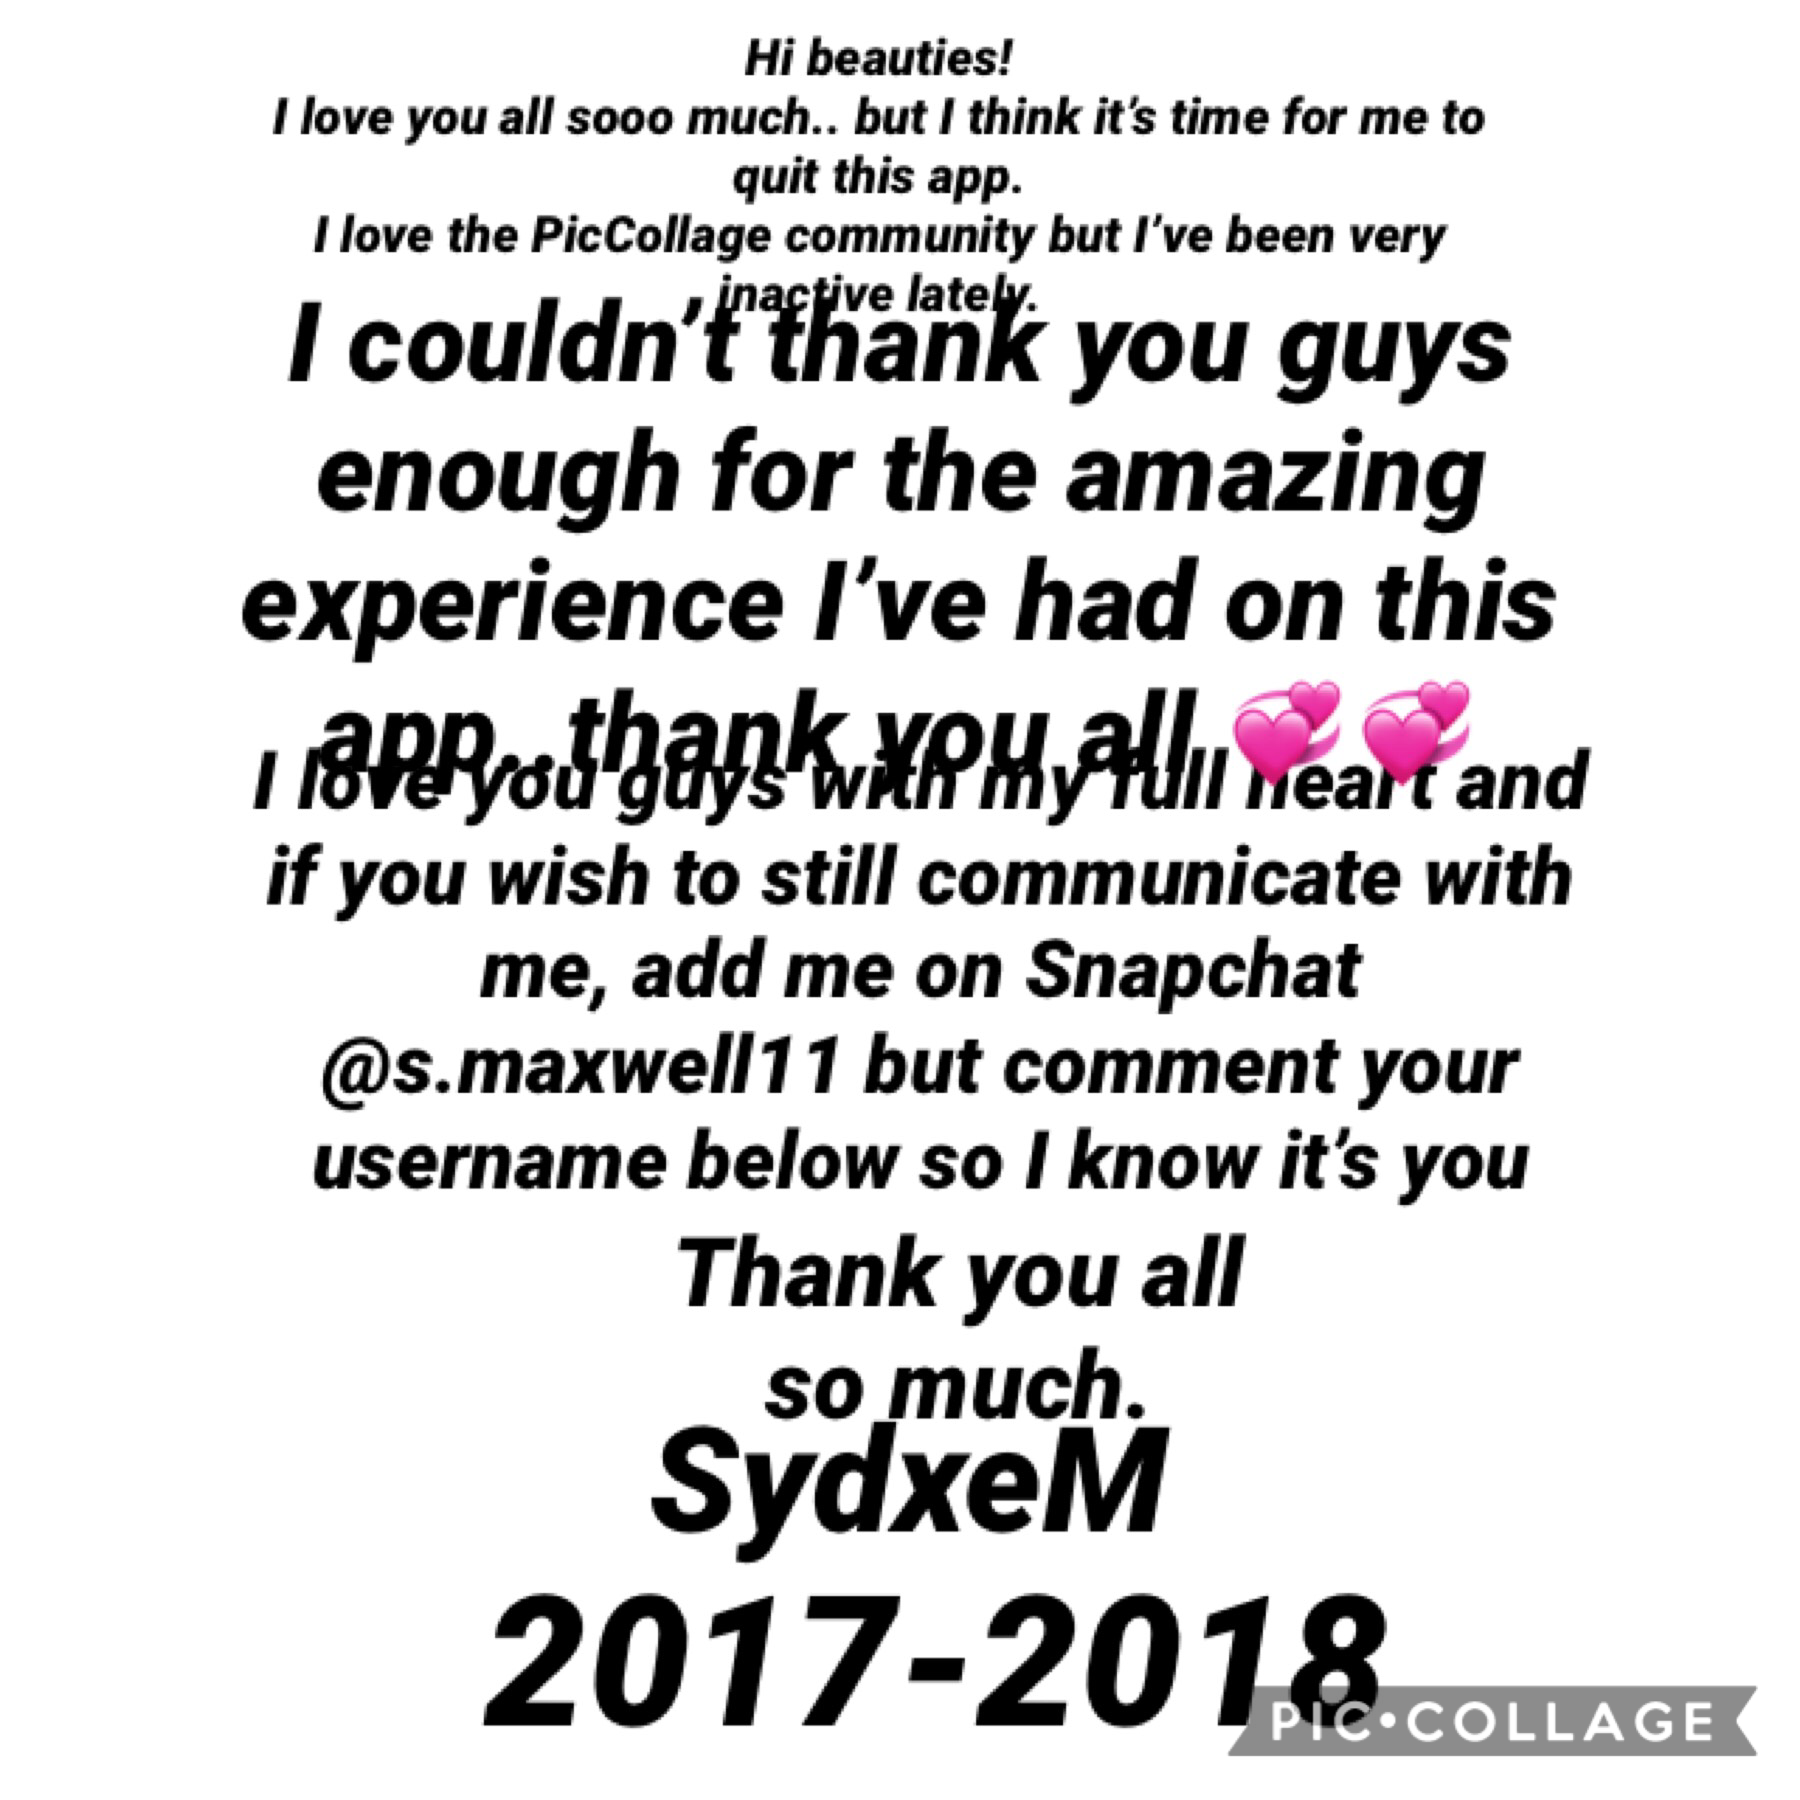 I love you all thank you so much 💔